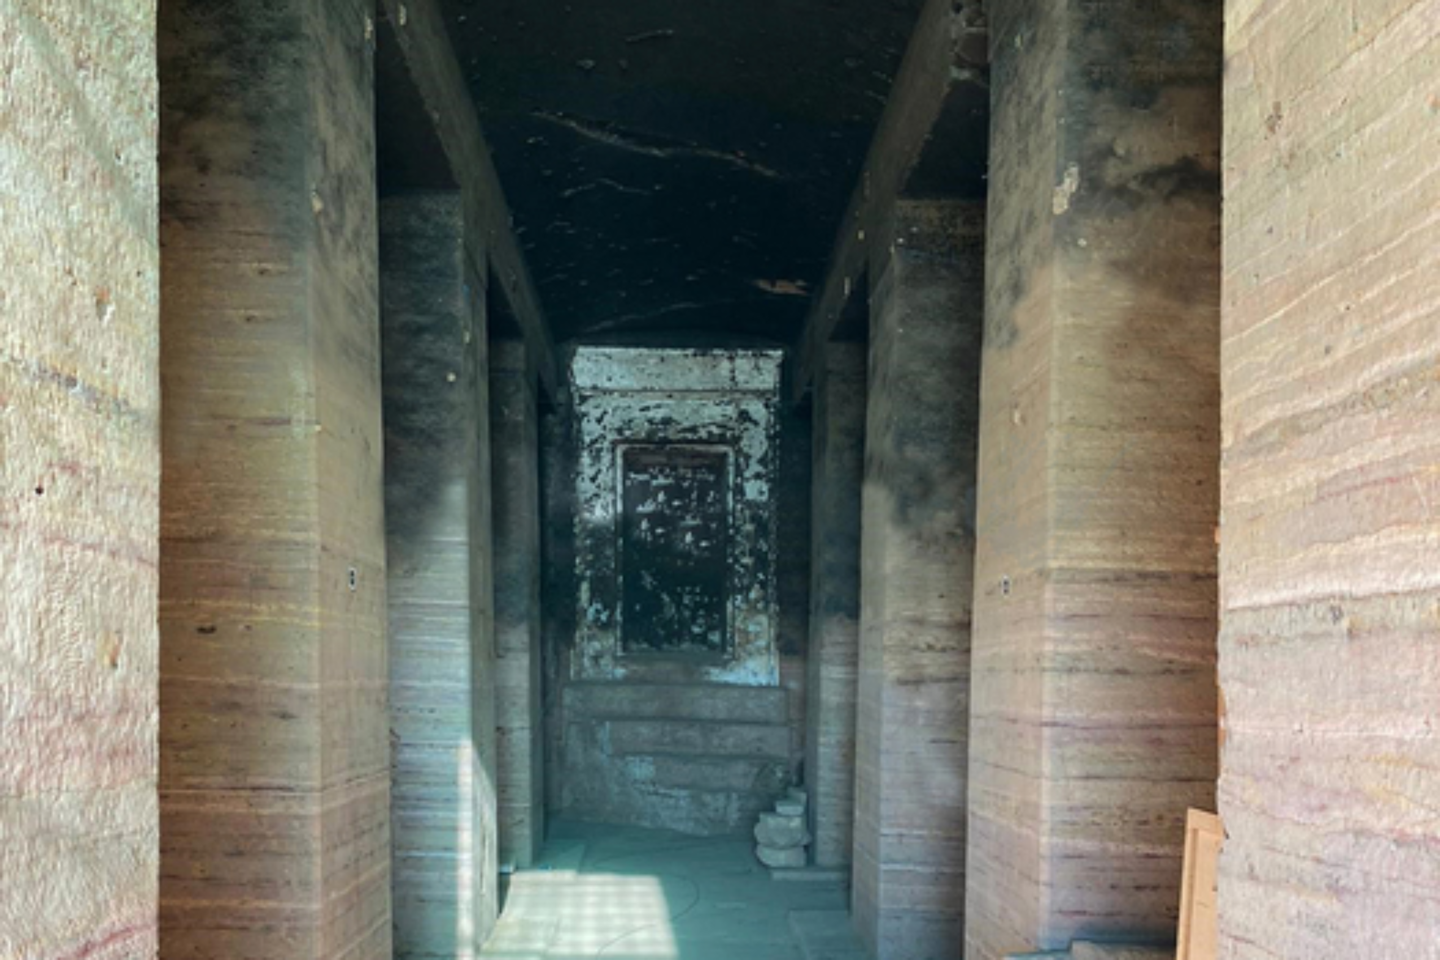 Located in the necropolis of Qubbet el-Hawa (Aswan), the tomb is precisely oriented to the sunrise of the winter solstice.